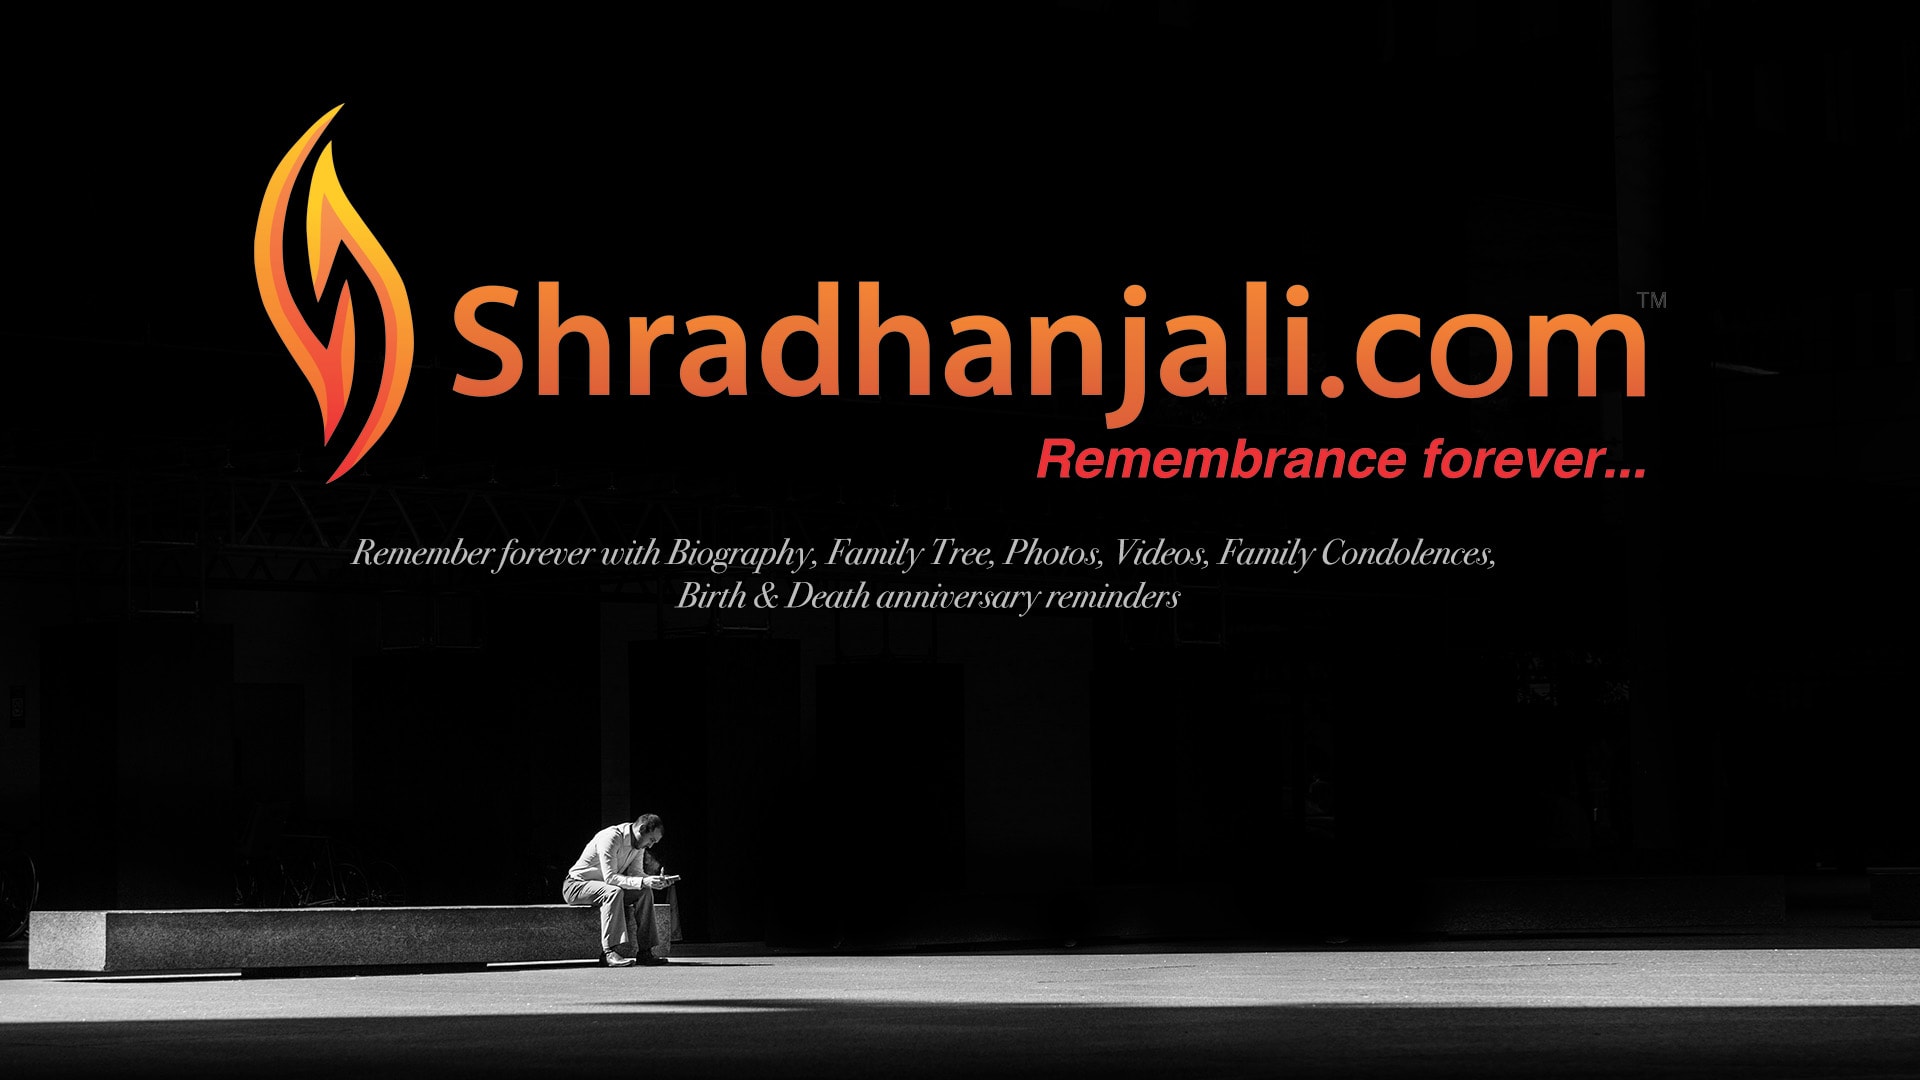 Shradhanjali.Com - India's First and Only Memorial Portal